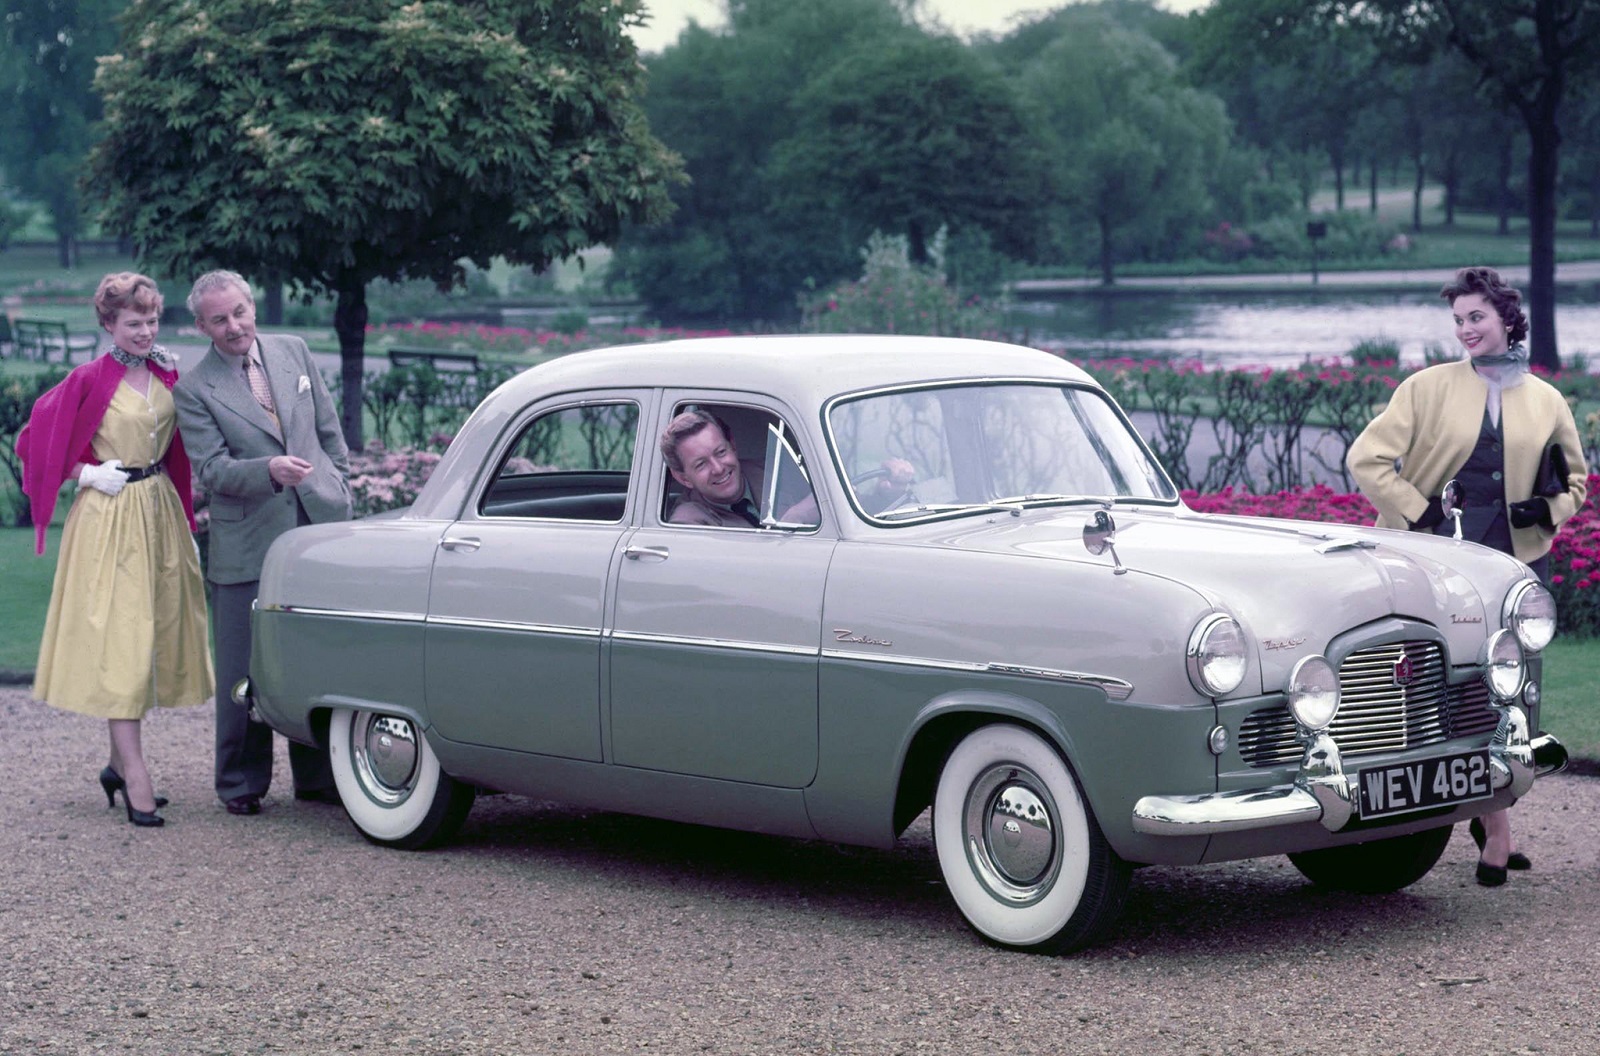 <p>British-made Ford models, like the <strong>Anglia</strong> and the <strong>Prefect</strong>, began trickling into America after World War II. While none were as popular as American-designed cars, they amassed a following because they were small, robust cars from a trusted name. Around <strong>3223 units</strong> were sold in 1948. Ford released the <strong>Consul</strong> in 1951, and it launched the six-cylinder-powered <strong>Zephyr</strong> (pictured) the following year.</p><p>Sales increased to <strong>33,472 units</strong> in 1958, which represented <strong>approximately 11%</strong> of the cars built by Ford of Britain that year. Demand for saloons was high enough for Ford to justify selling two distinctly different line-ups. Ford sent about <strong>10,200</strong> British-built cars to America in 1970. Sales ended before the 1971 model year.</p>